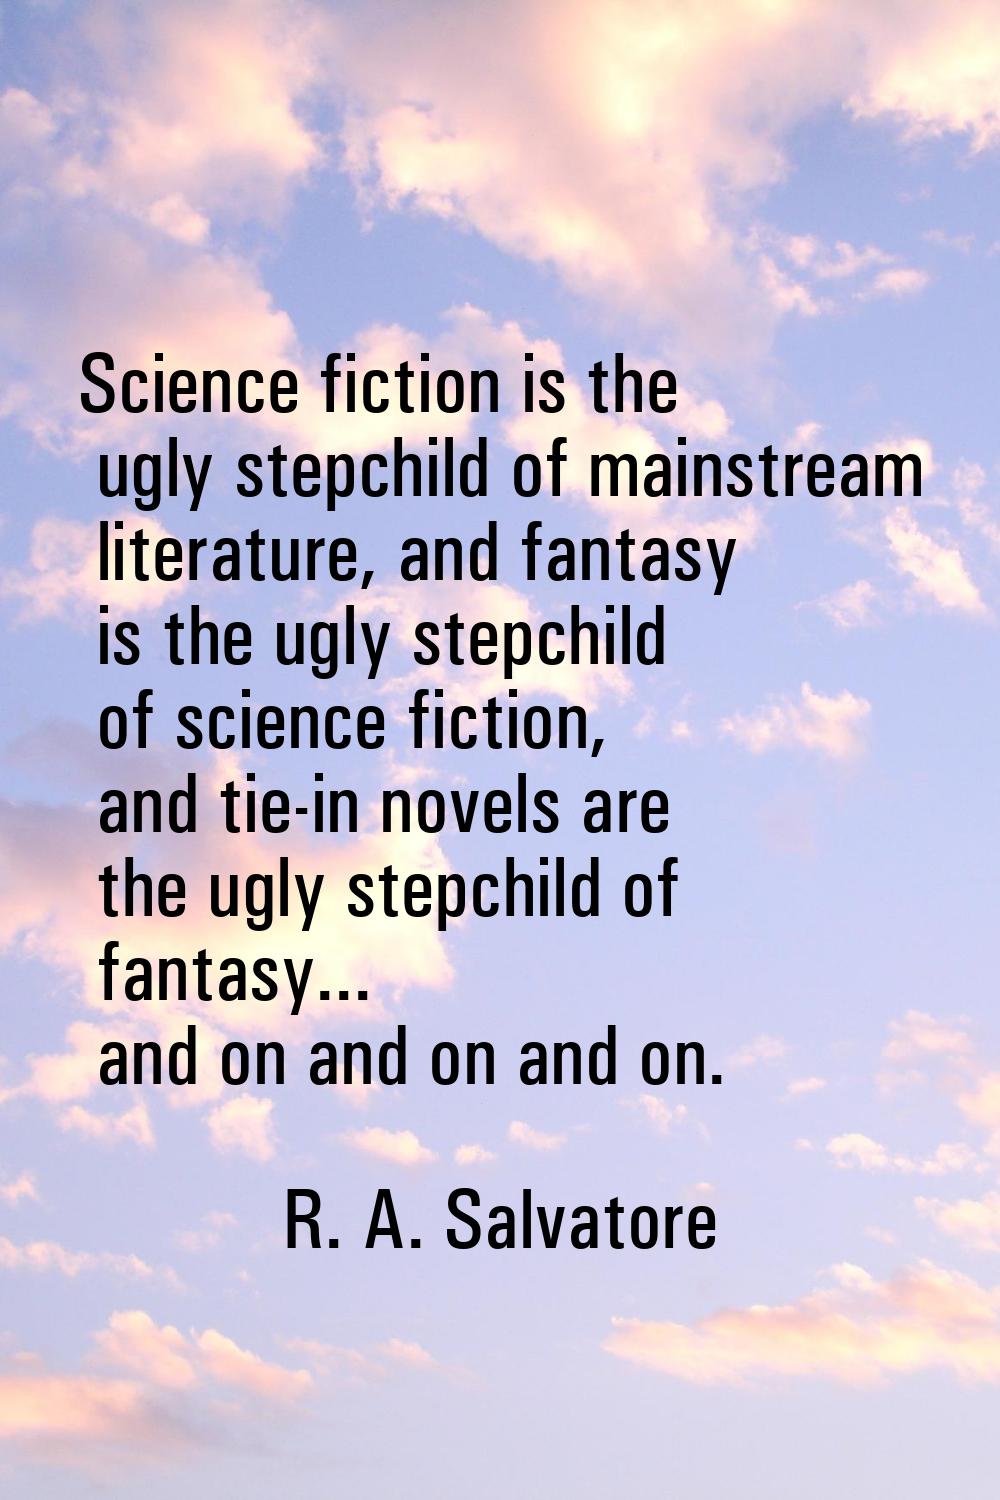 Science fiction is the ugly stepchild of mainstream literature, and fantasy is the ugly stepchild o